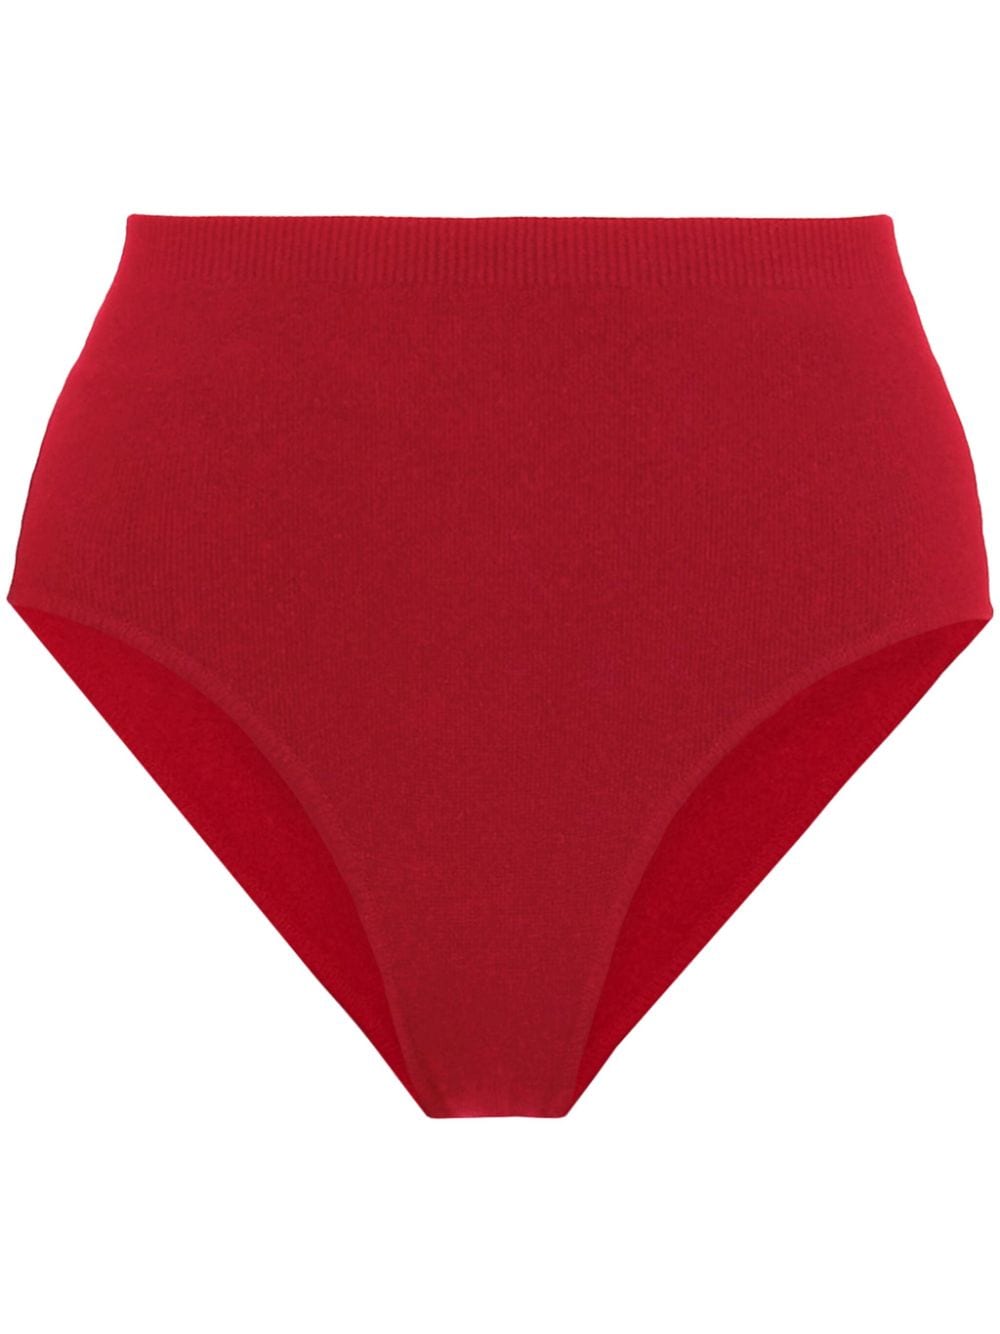 Ferragamo high-waisted ribbed shorts - Red